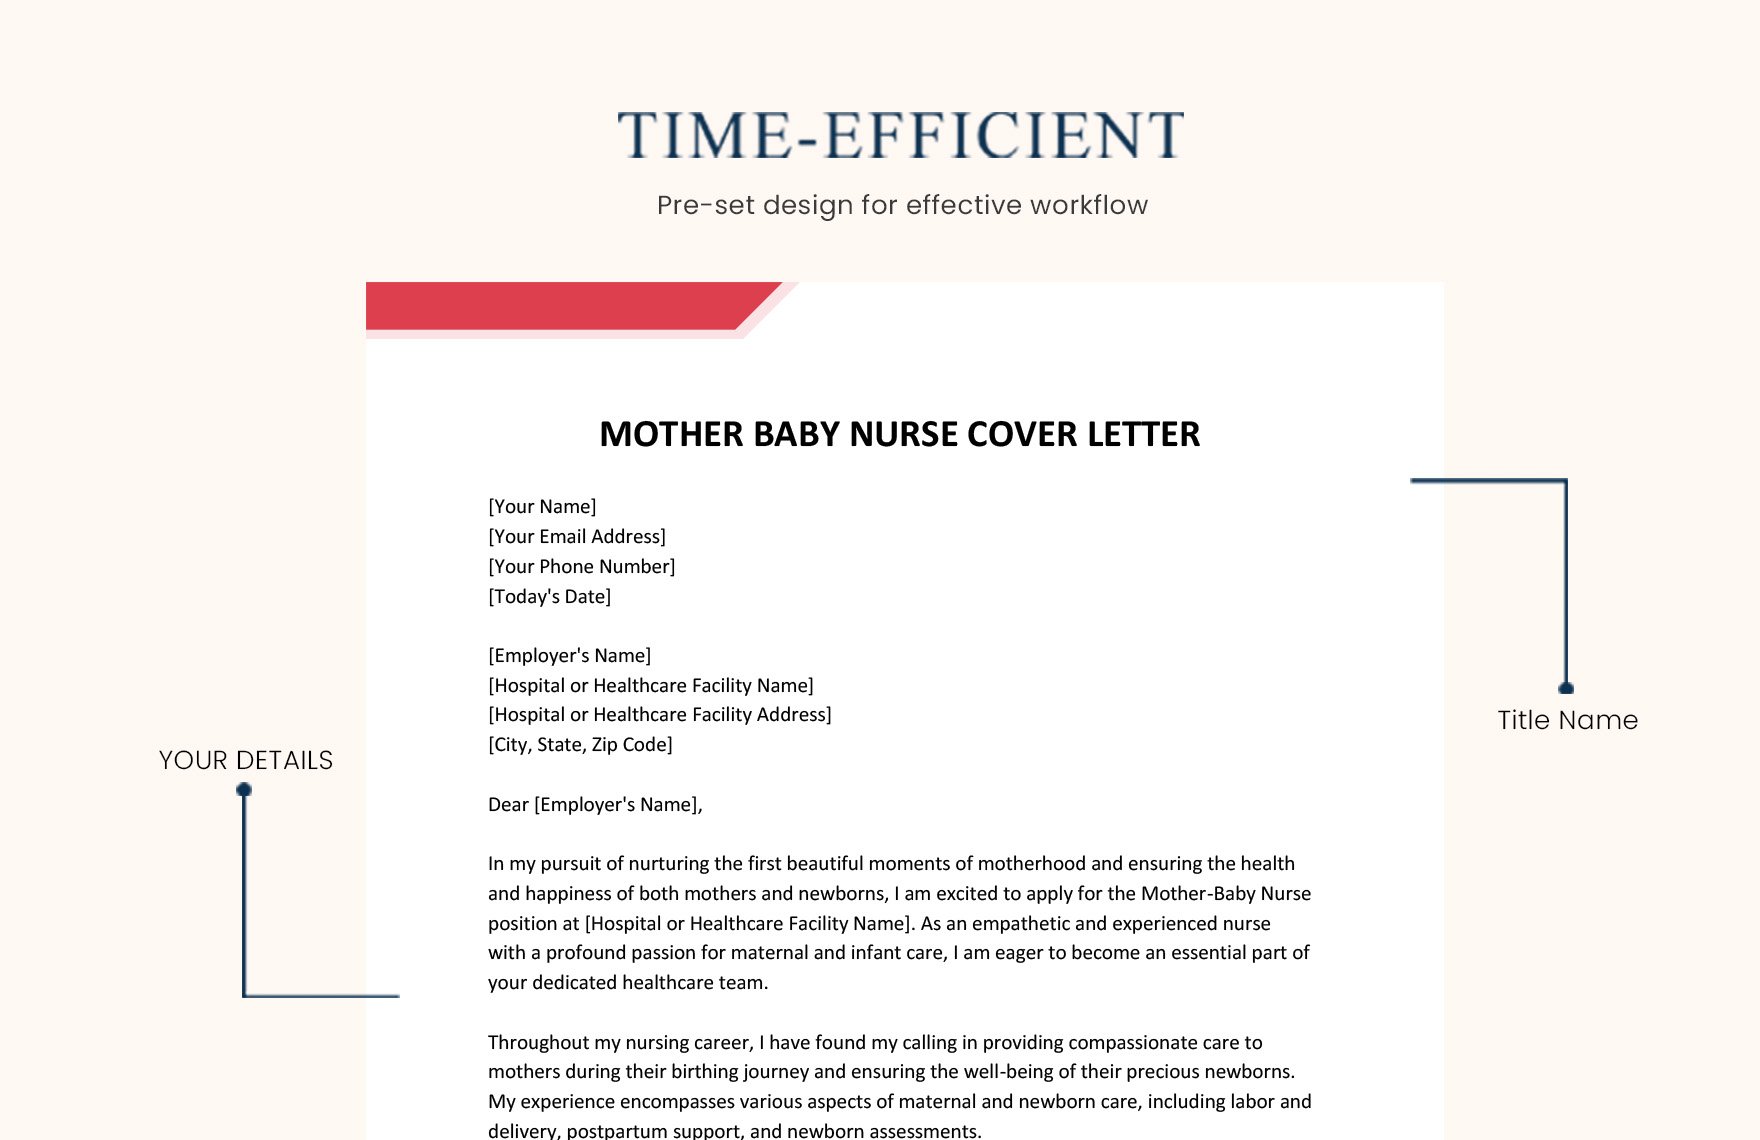 Mother Baby Nurse Cover Letter